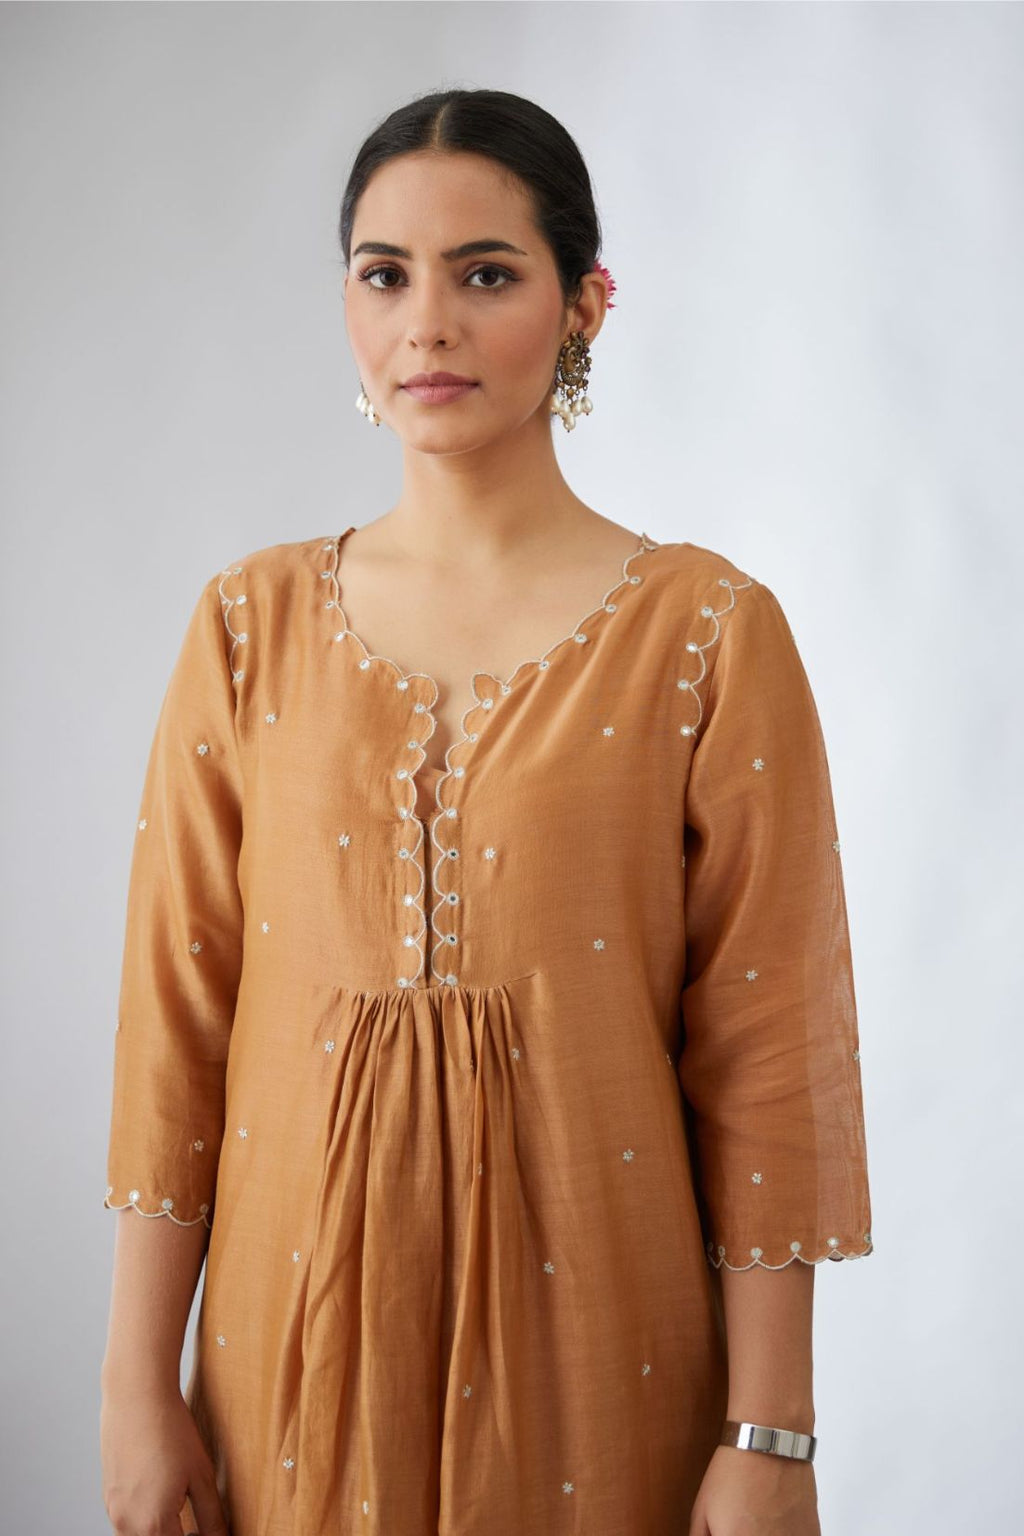 Silk chanderi Kurta dress set with all-over delicately embroidered silver zari flowers and scalloped edges, highlighted with hand attached mirrors